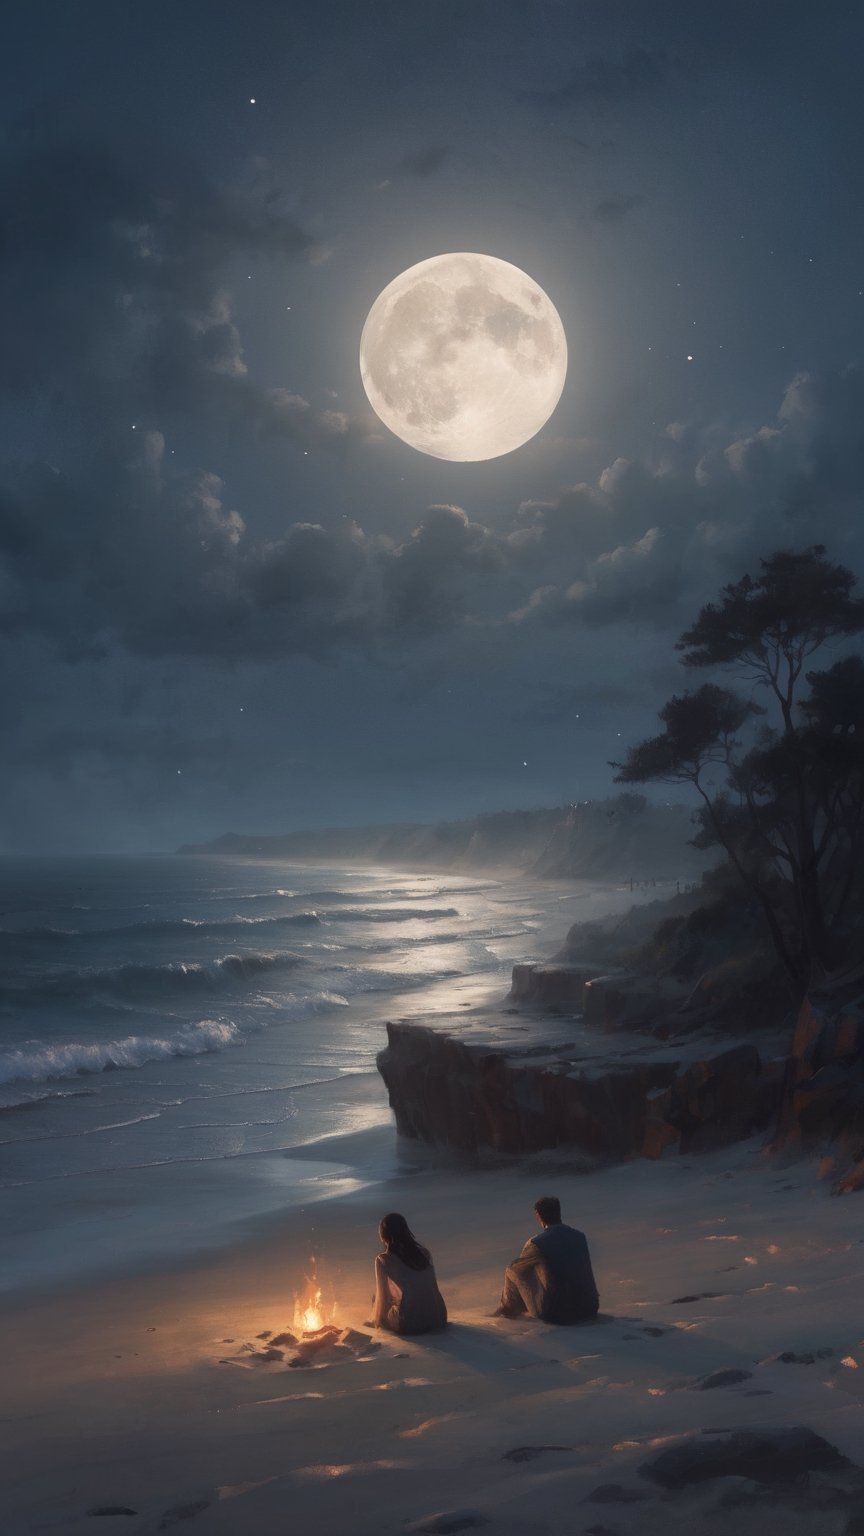 In the midst of a moonlit beach, a couple rests on a large, flat rock. The rock is slightly elevated, offering a panoramic view of the shoreline. The moon is a radiant centerpiece in the inky sky, casting a silvery trail across the water. The couple's backs are turned to the viewer, their figures softly lit by the moonlight. Their fingers are laced together, a symbol of their connection. The environment around them is a mix of untouched sand and scattered seashells. A small driftwood fire burns nearby, its warm glow contrasting with the cool moonlight. The air is still, with only the distant sound of waves breaking the silence. The atmosphere is one of quiet romance and contemplation. An illustration that captures the delicate interplay of moonlight and firelight, using a digital medium with intricate brushwork to convey the textures and emotions.